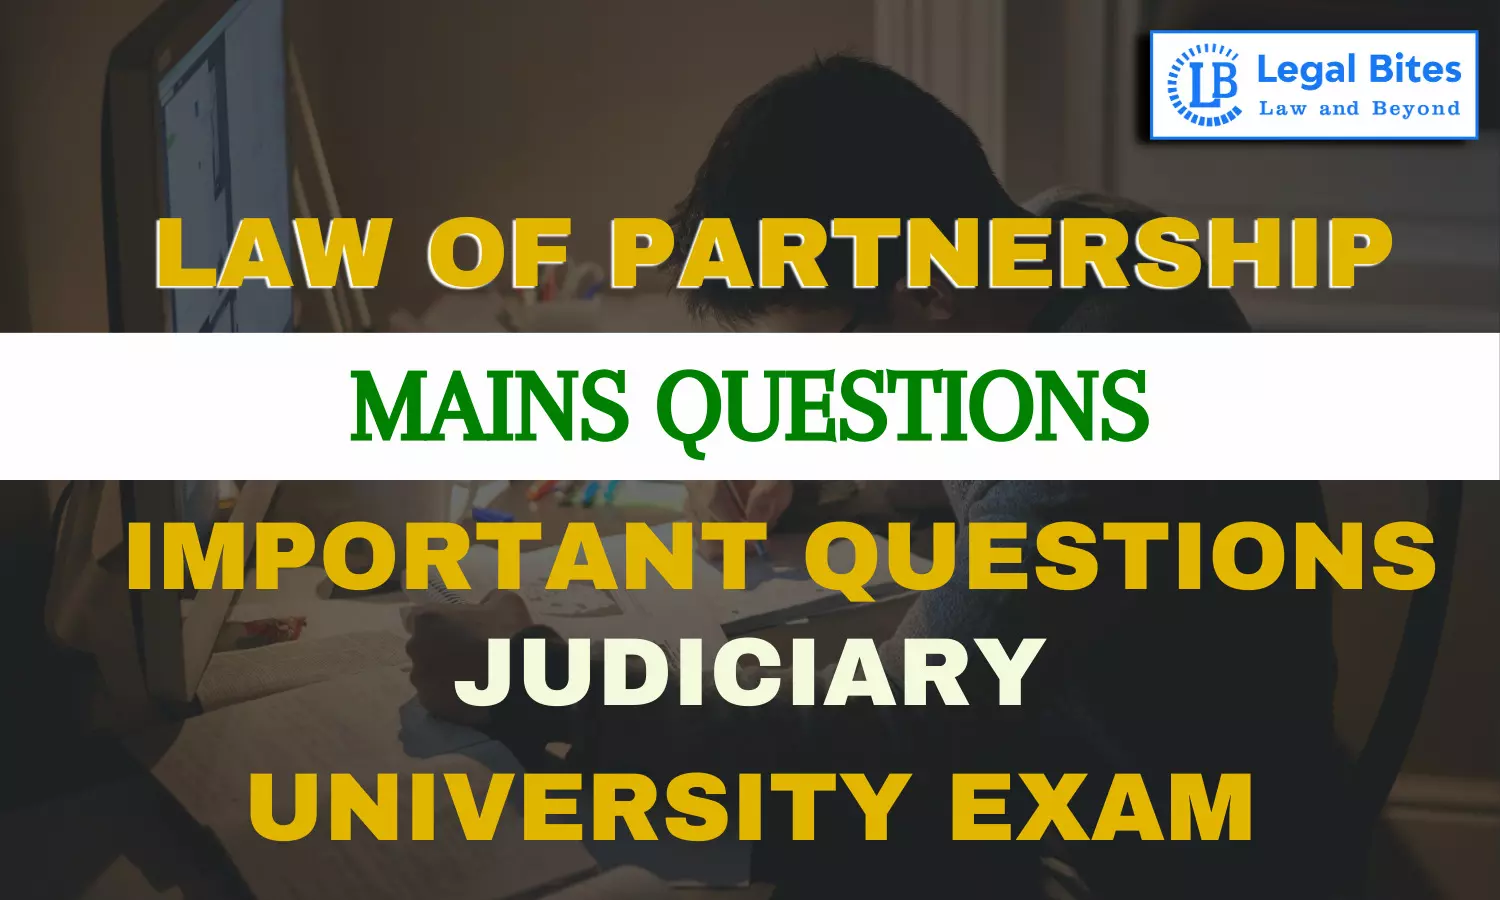 Comment on the statement that dissolution involves a change in the relation of partners but does not end partnership.